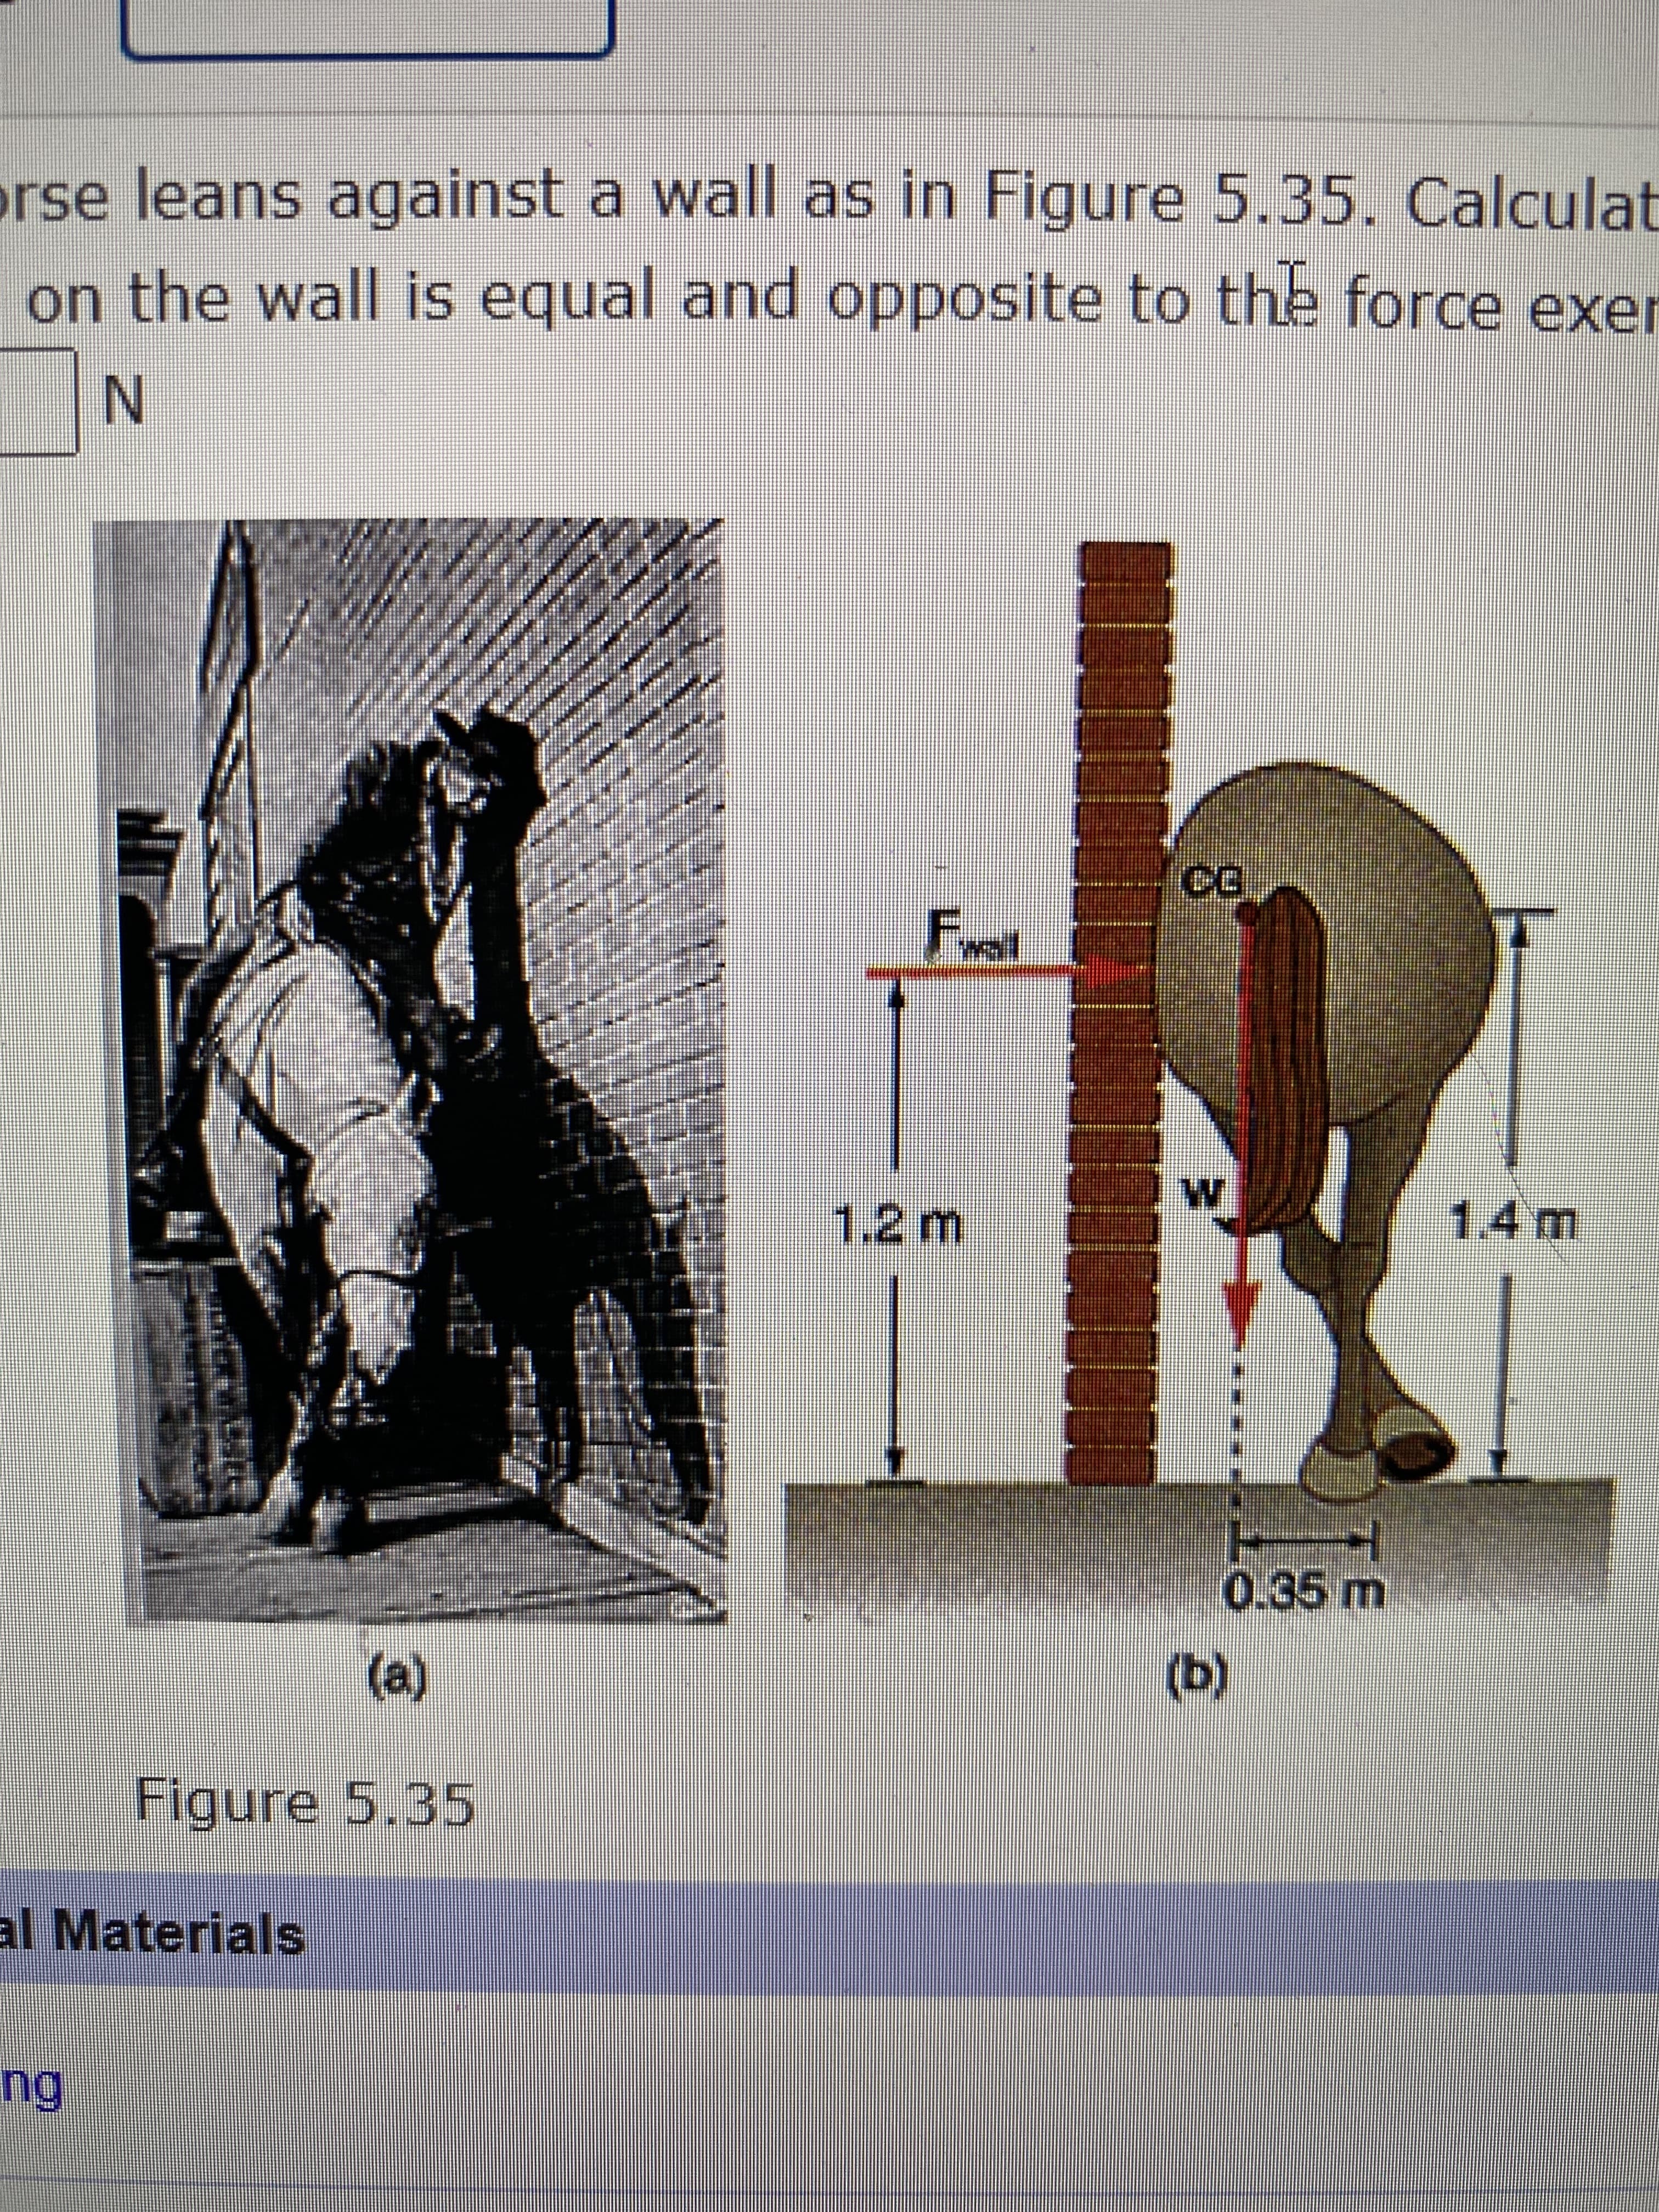 F.
rse leans against a wall as in Figure 5.35. Calculat
on the wall is equal and opposite to the force exer
EXO
1.2m
(e)
Figure 5.35
(q)
al Materials
ng
